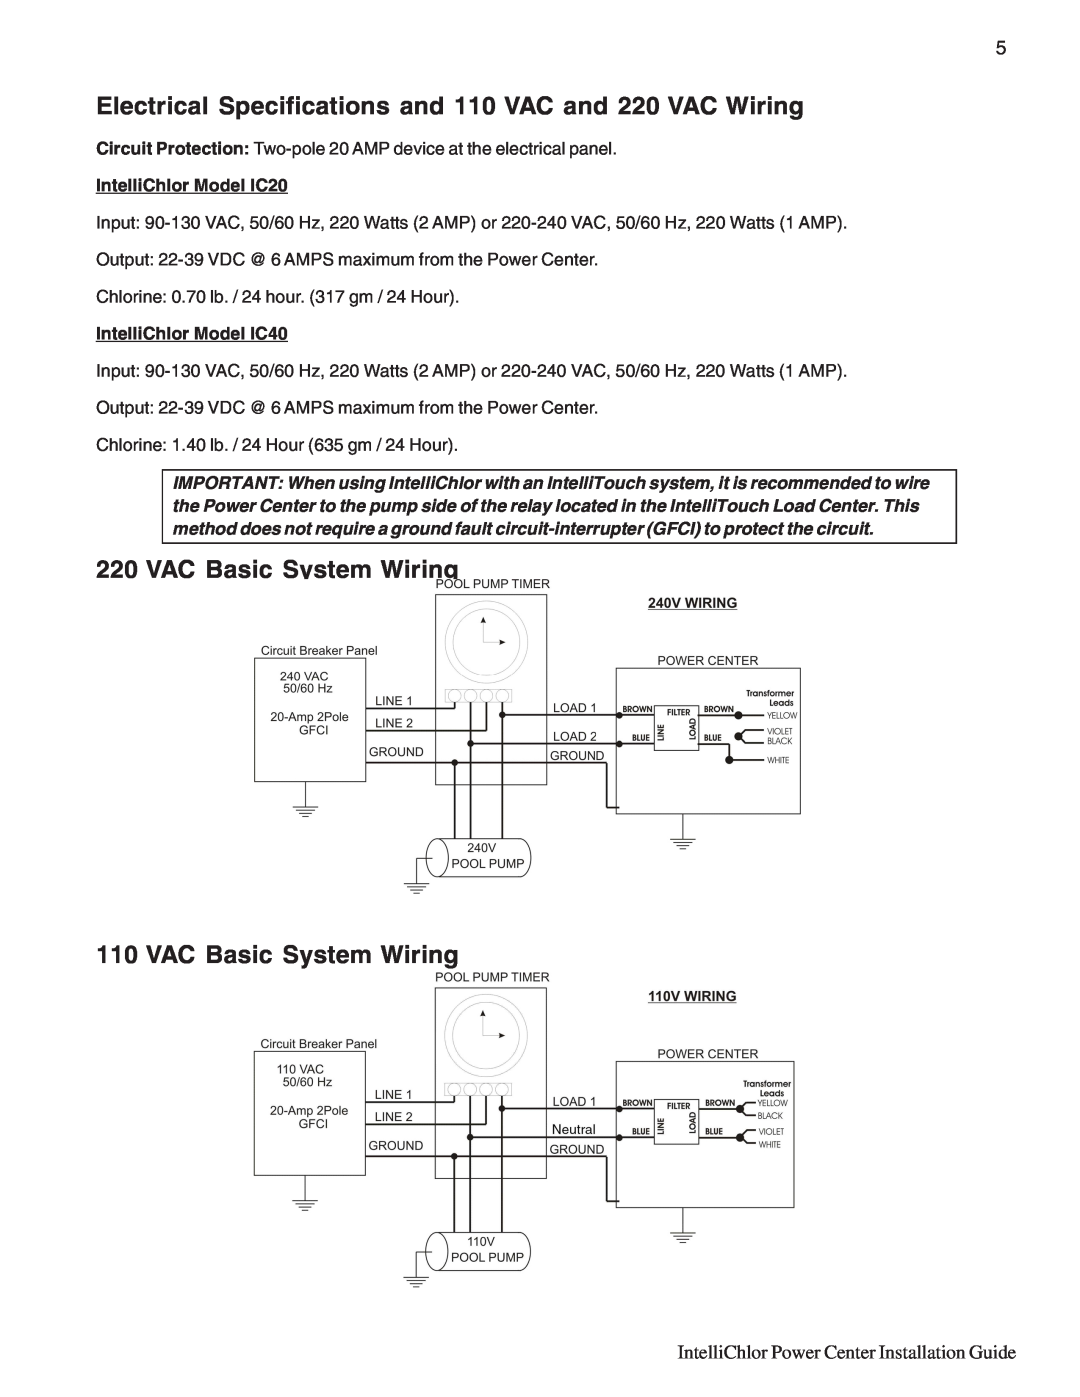 Pentair C40 Electrical Specifications and 110 VAC and 220 VAC Wiring, VAC Basic System Wiring 110 VAC Basic System Wiring 